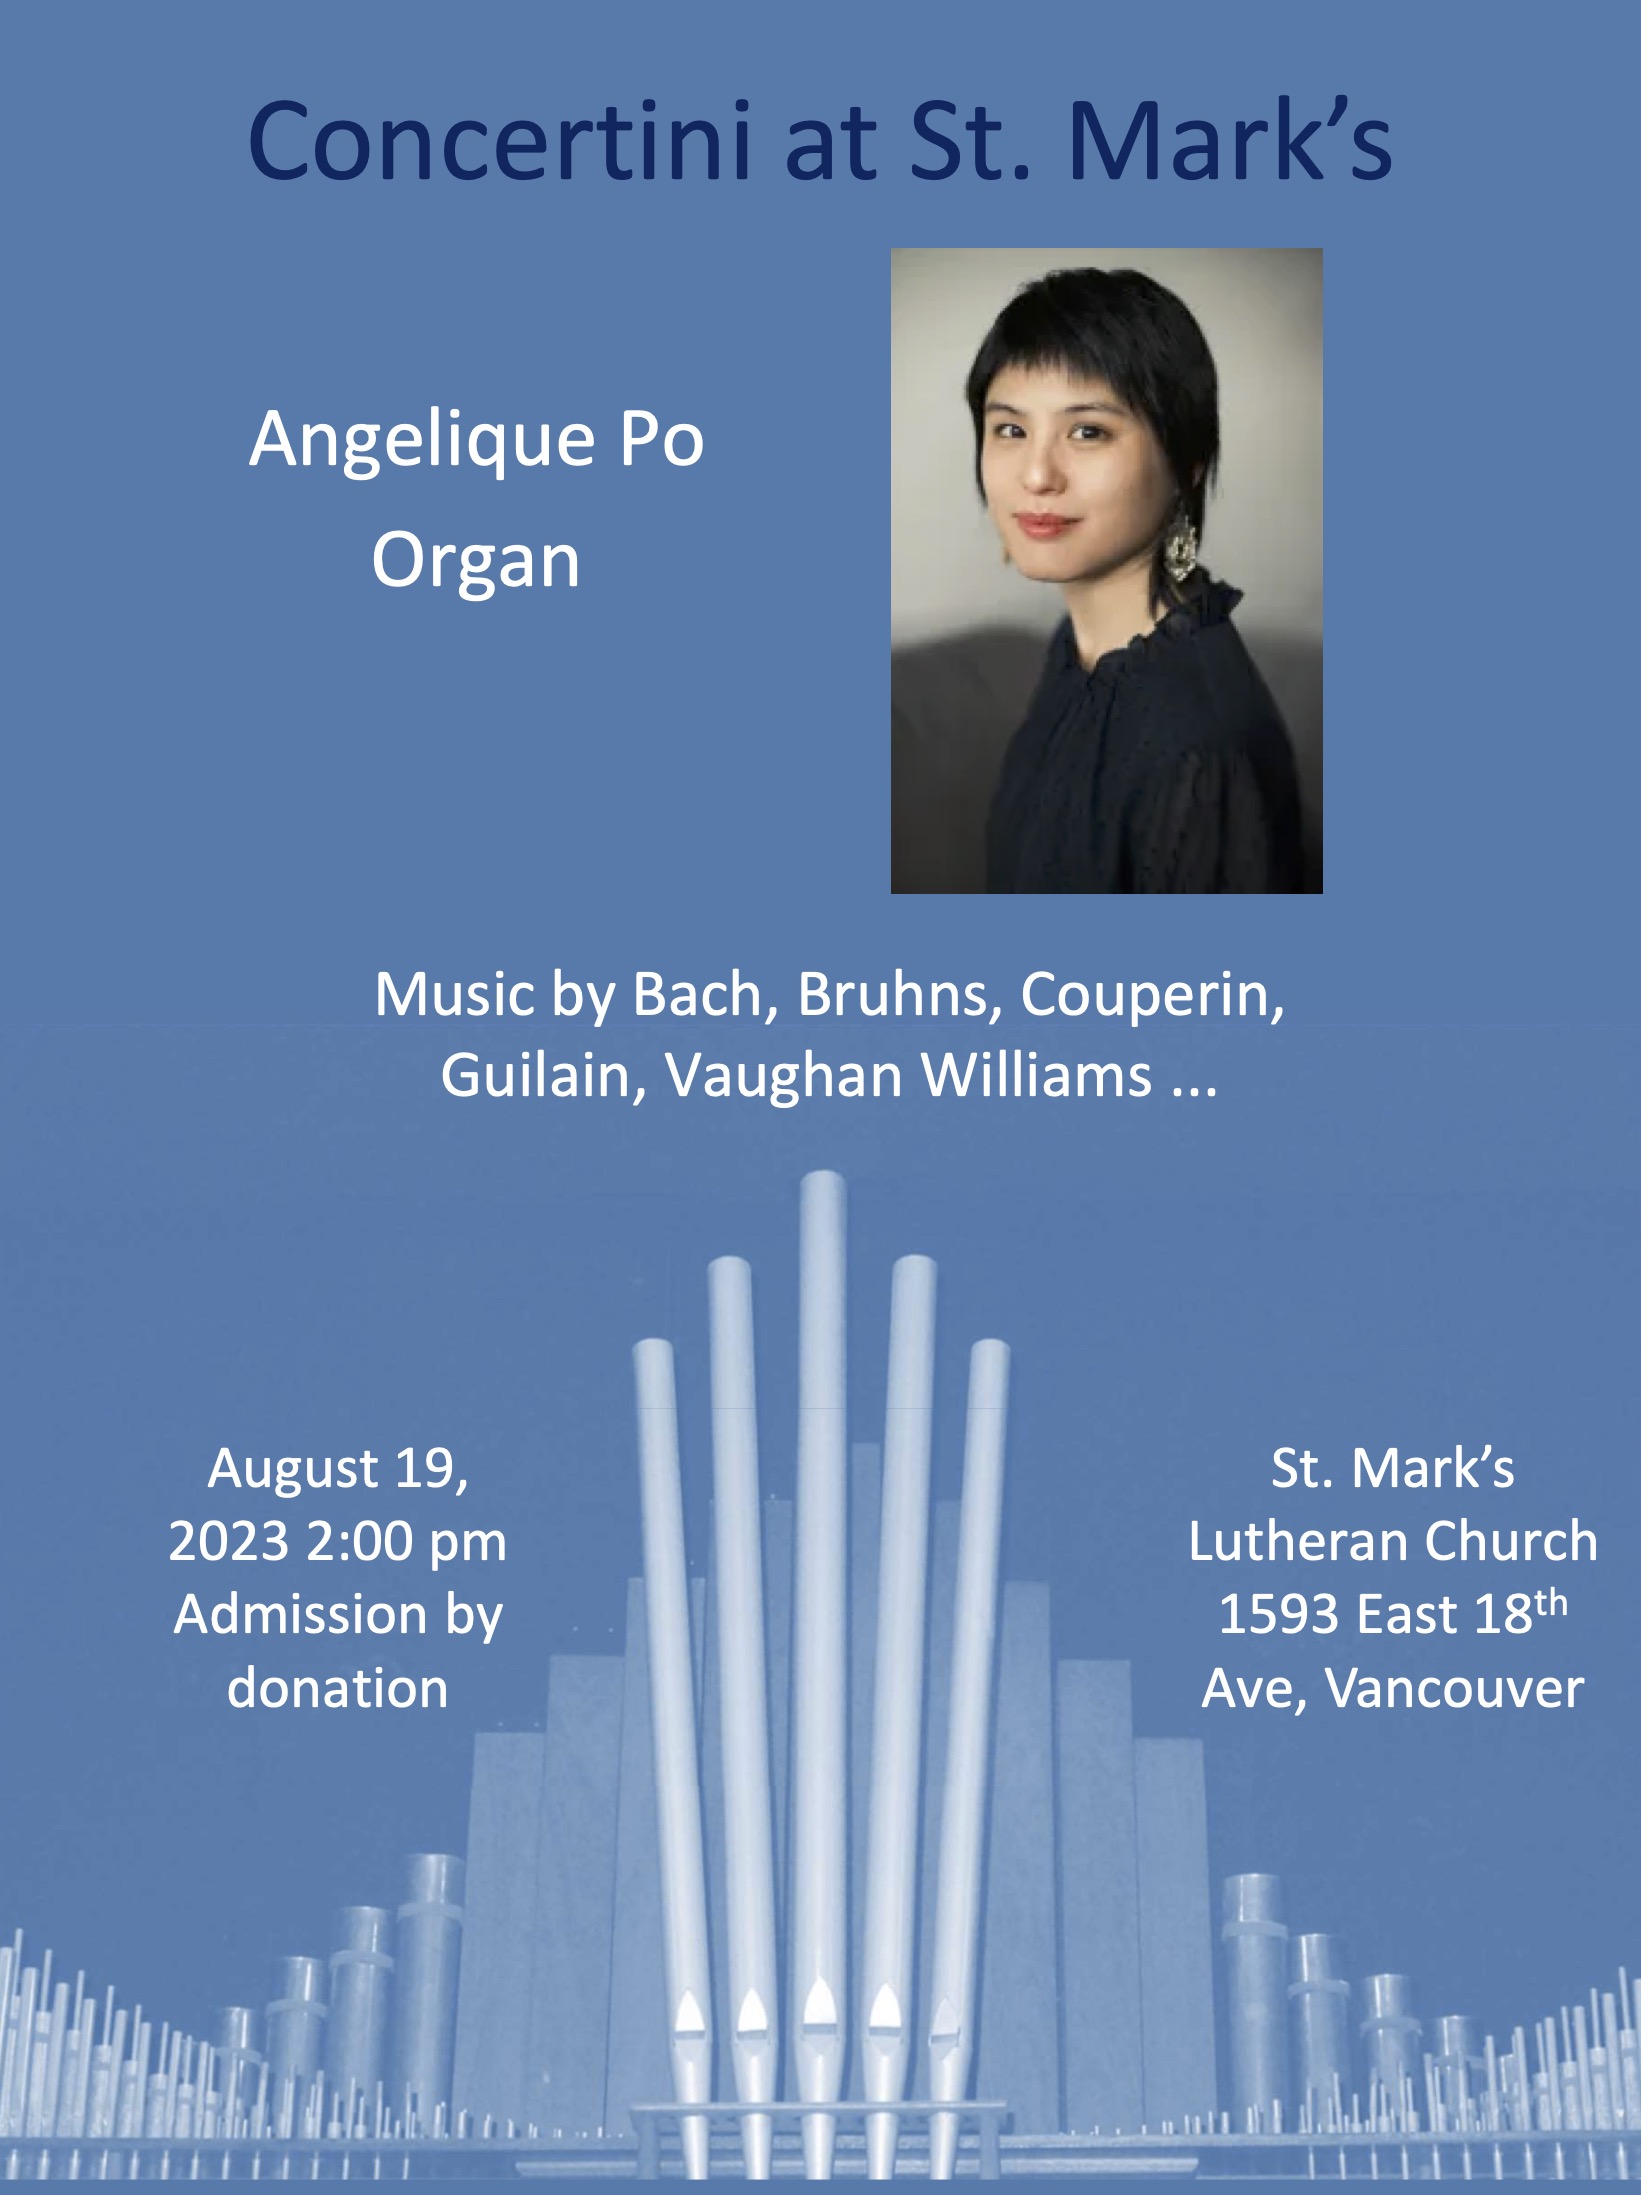 Organ Concertini at St. Mark’s: Organ Recital by Angelique Po @ St. Mark's Evangelical Lutheran Church